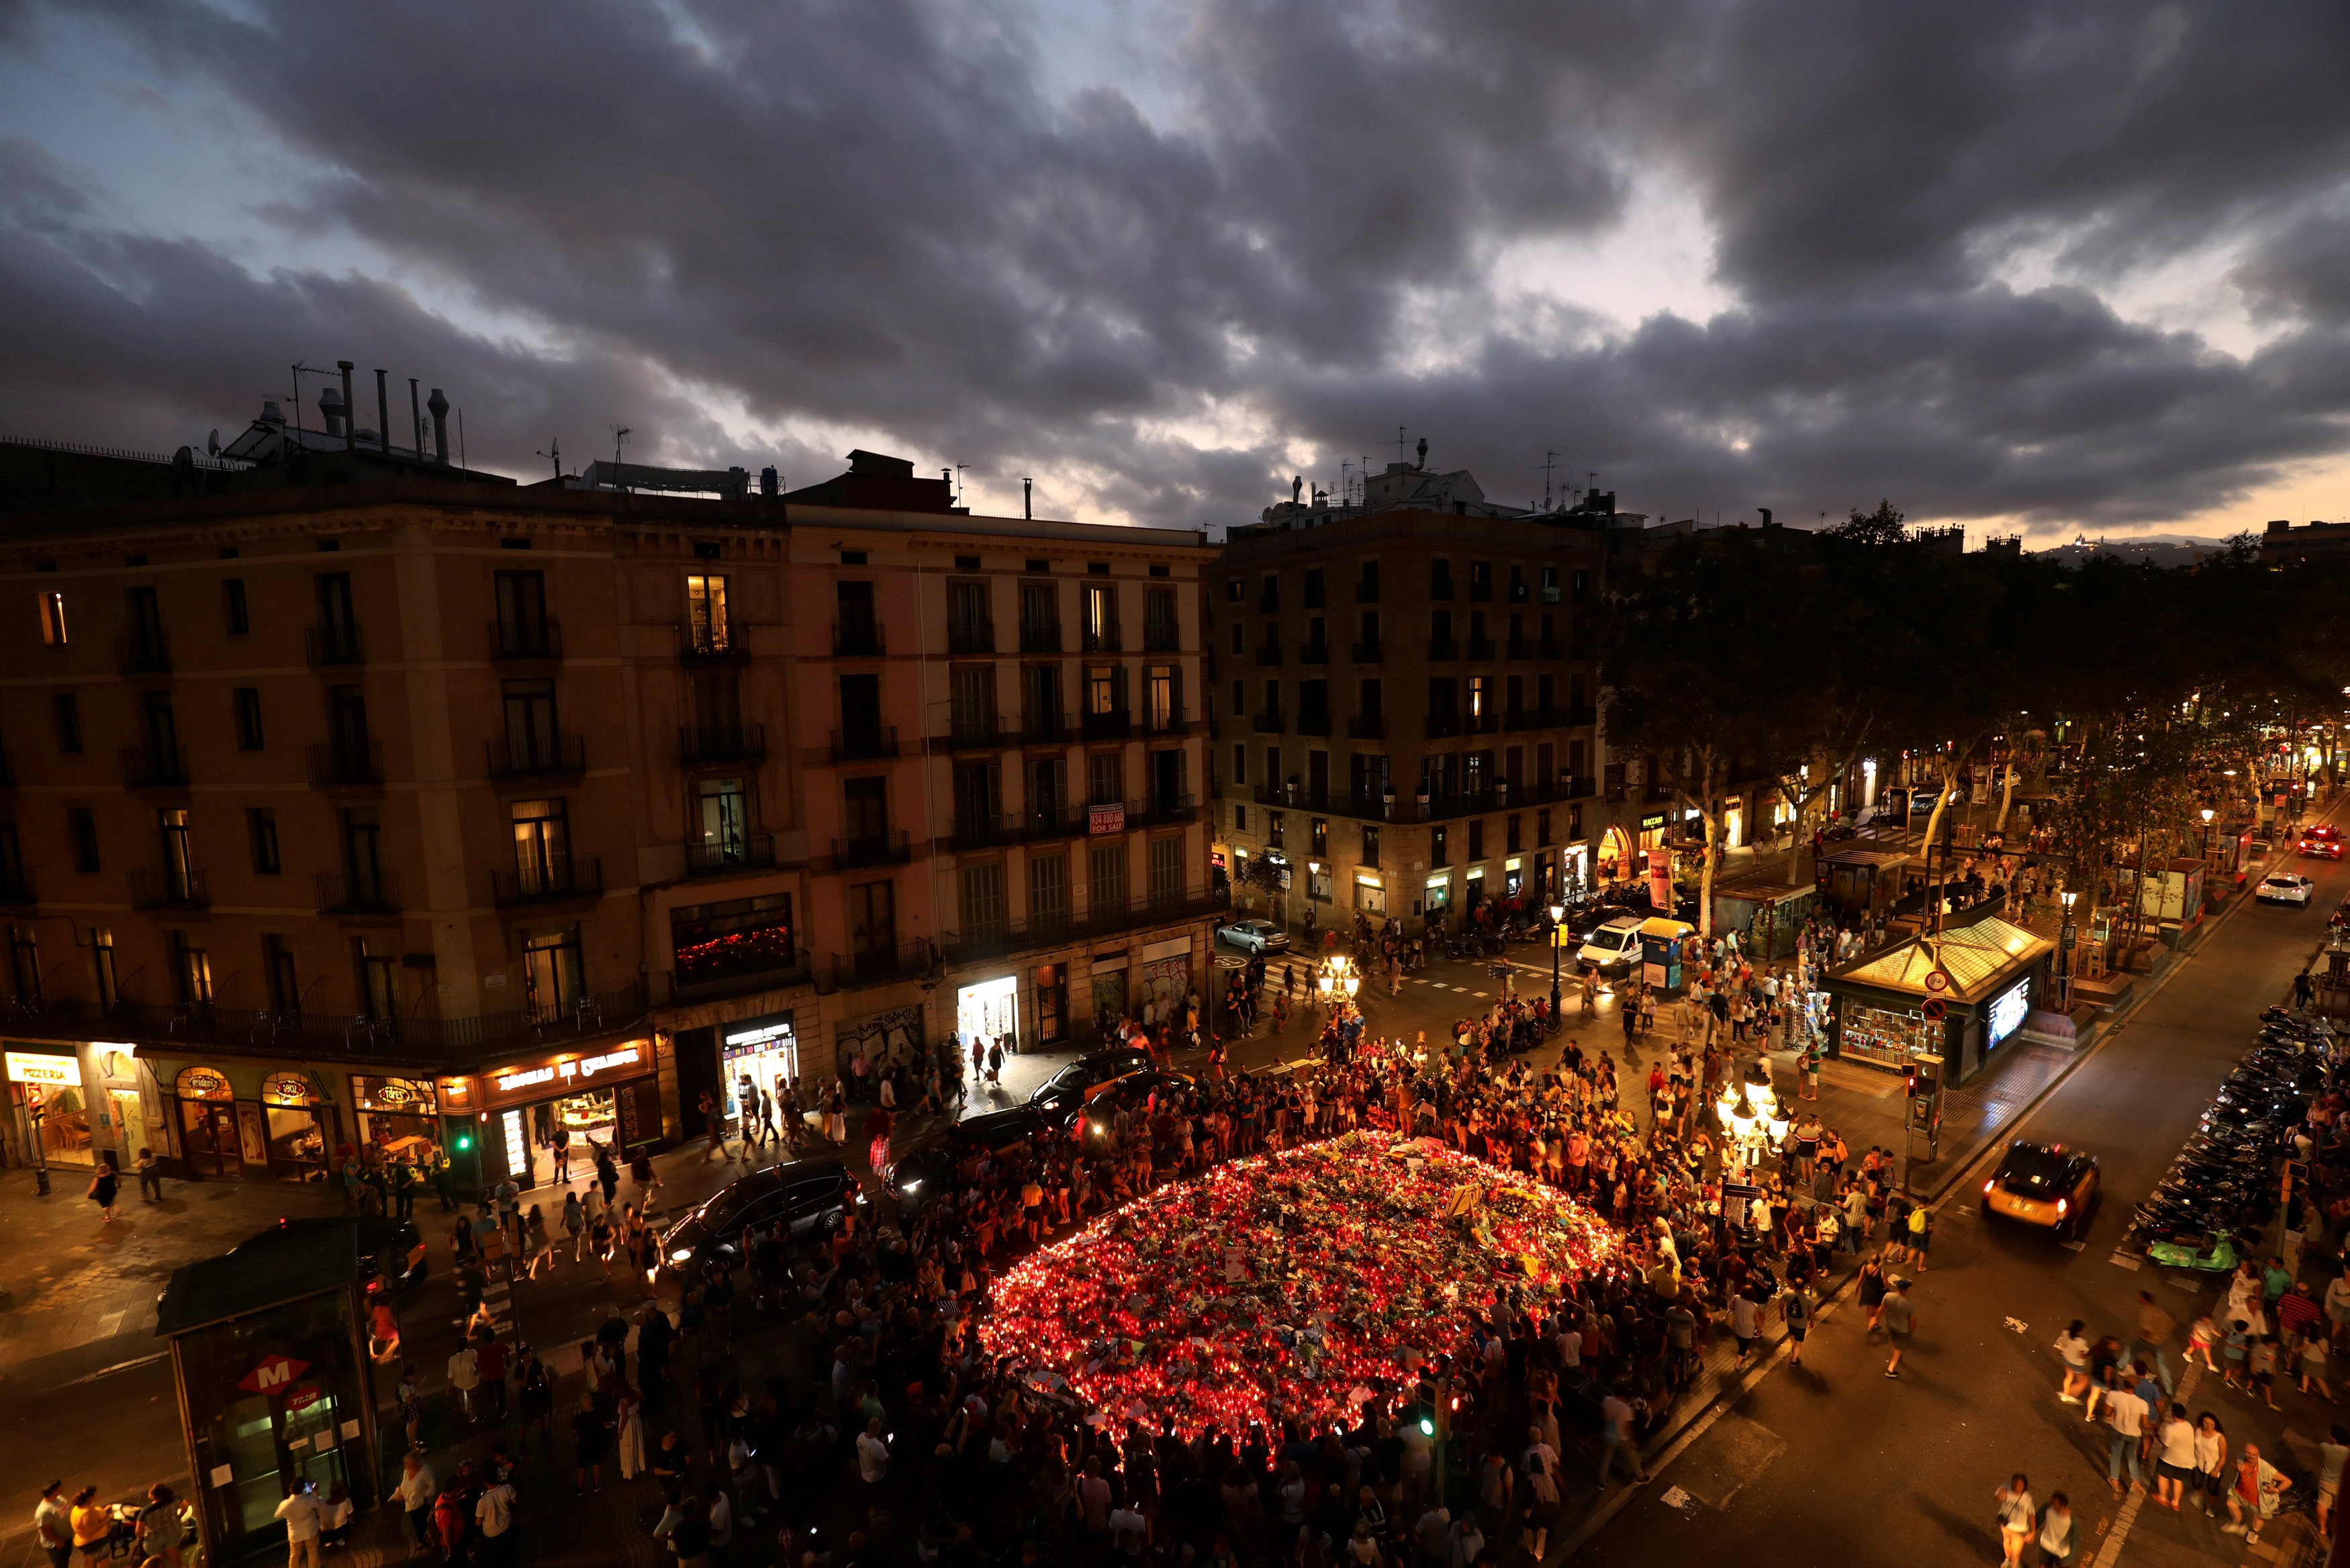 Crowds gather at an impromptu memorial where a van crashed into pedestrians a few days before, at Las Ramblas in Barcelona on August 20. Islamic State jihadists have claimed responsibility for the deadly attack. Photo: Reuters